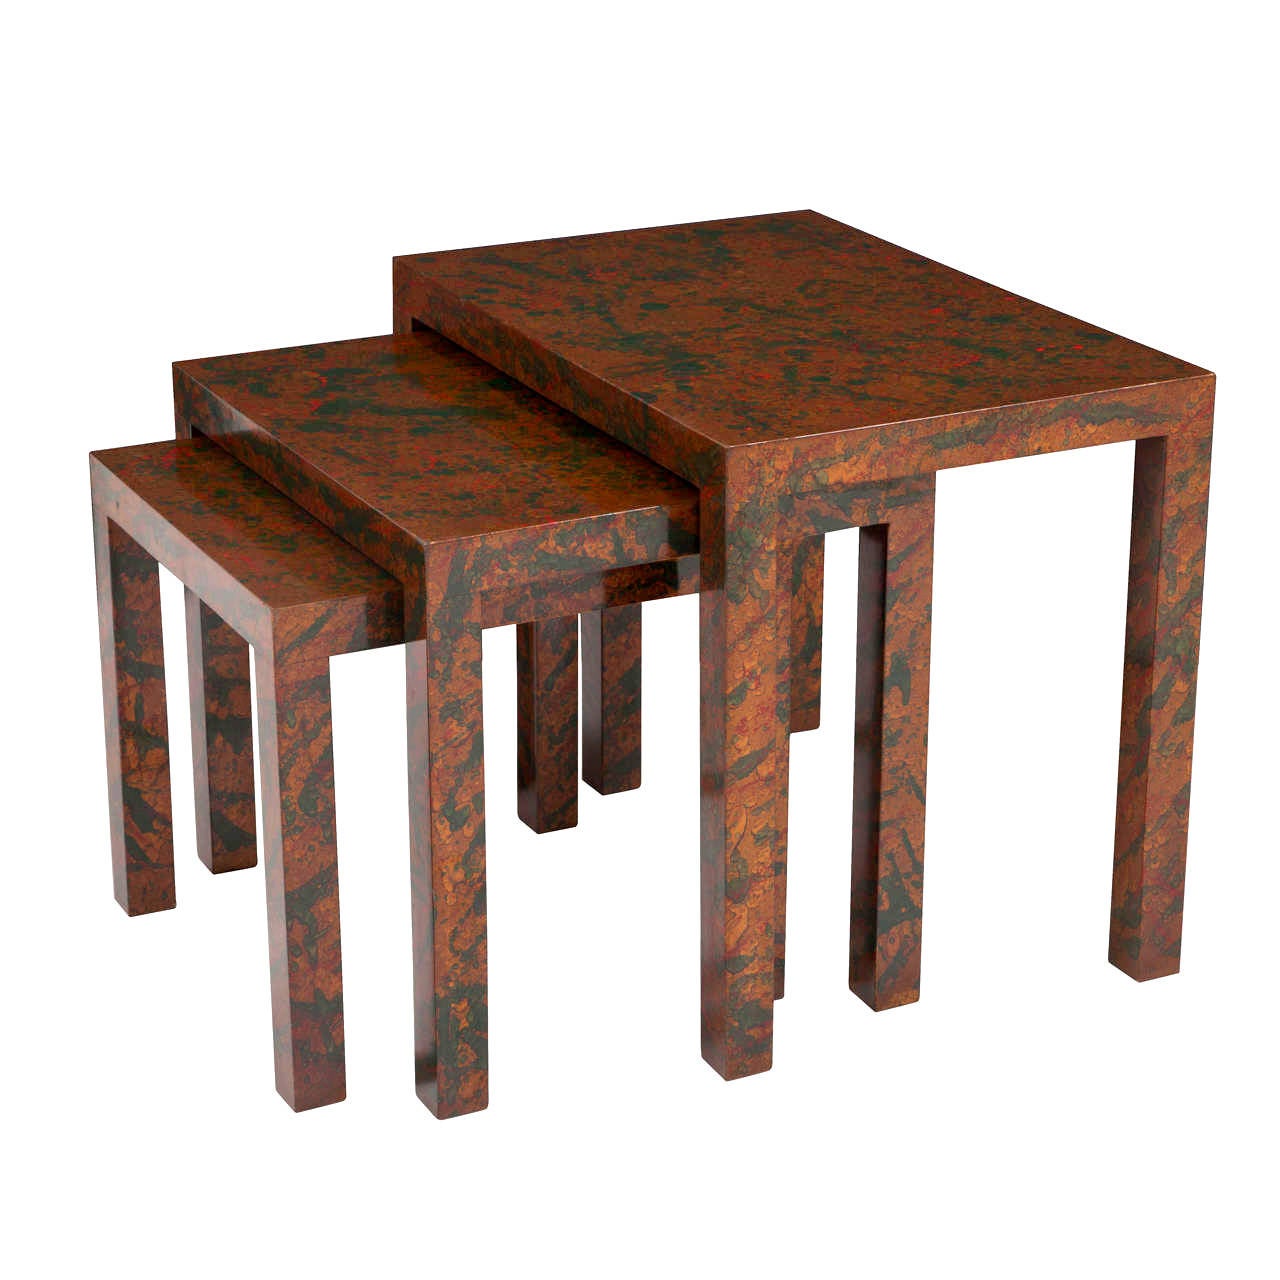 Oil Drop Lacquer Nesting Tables For Sale